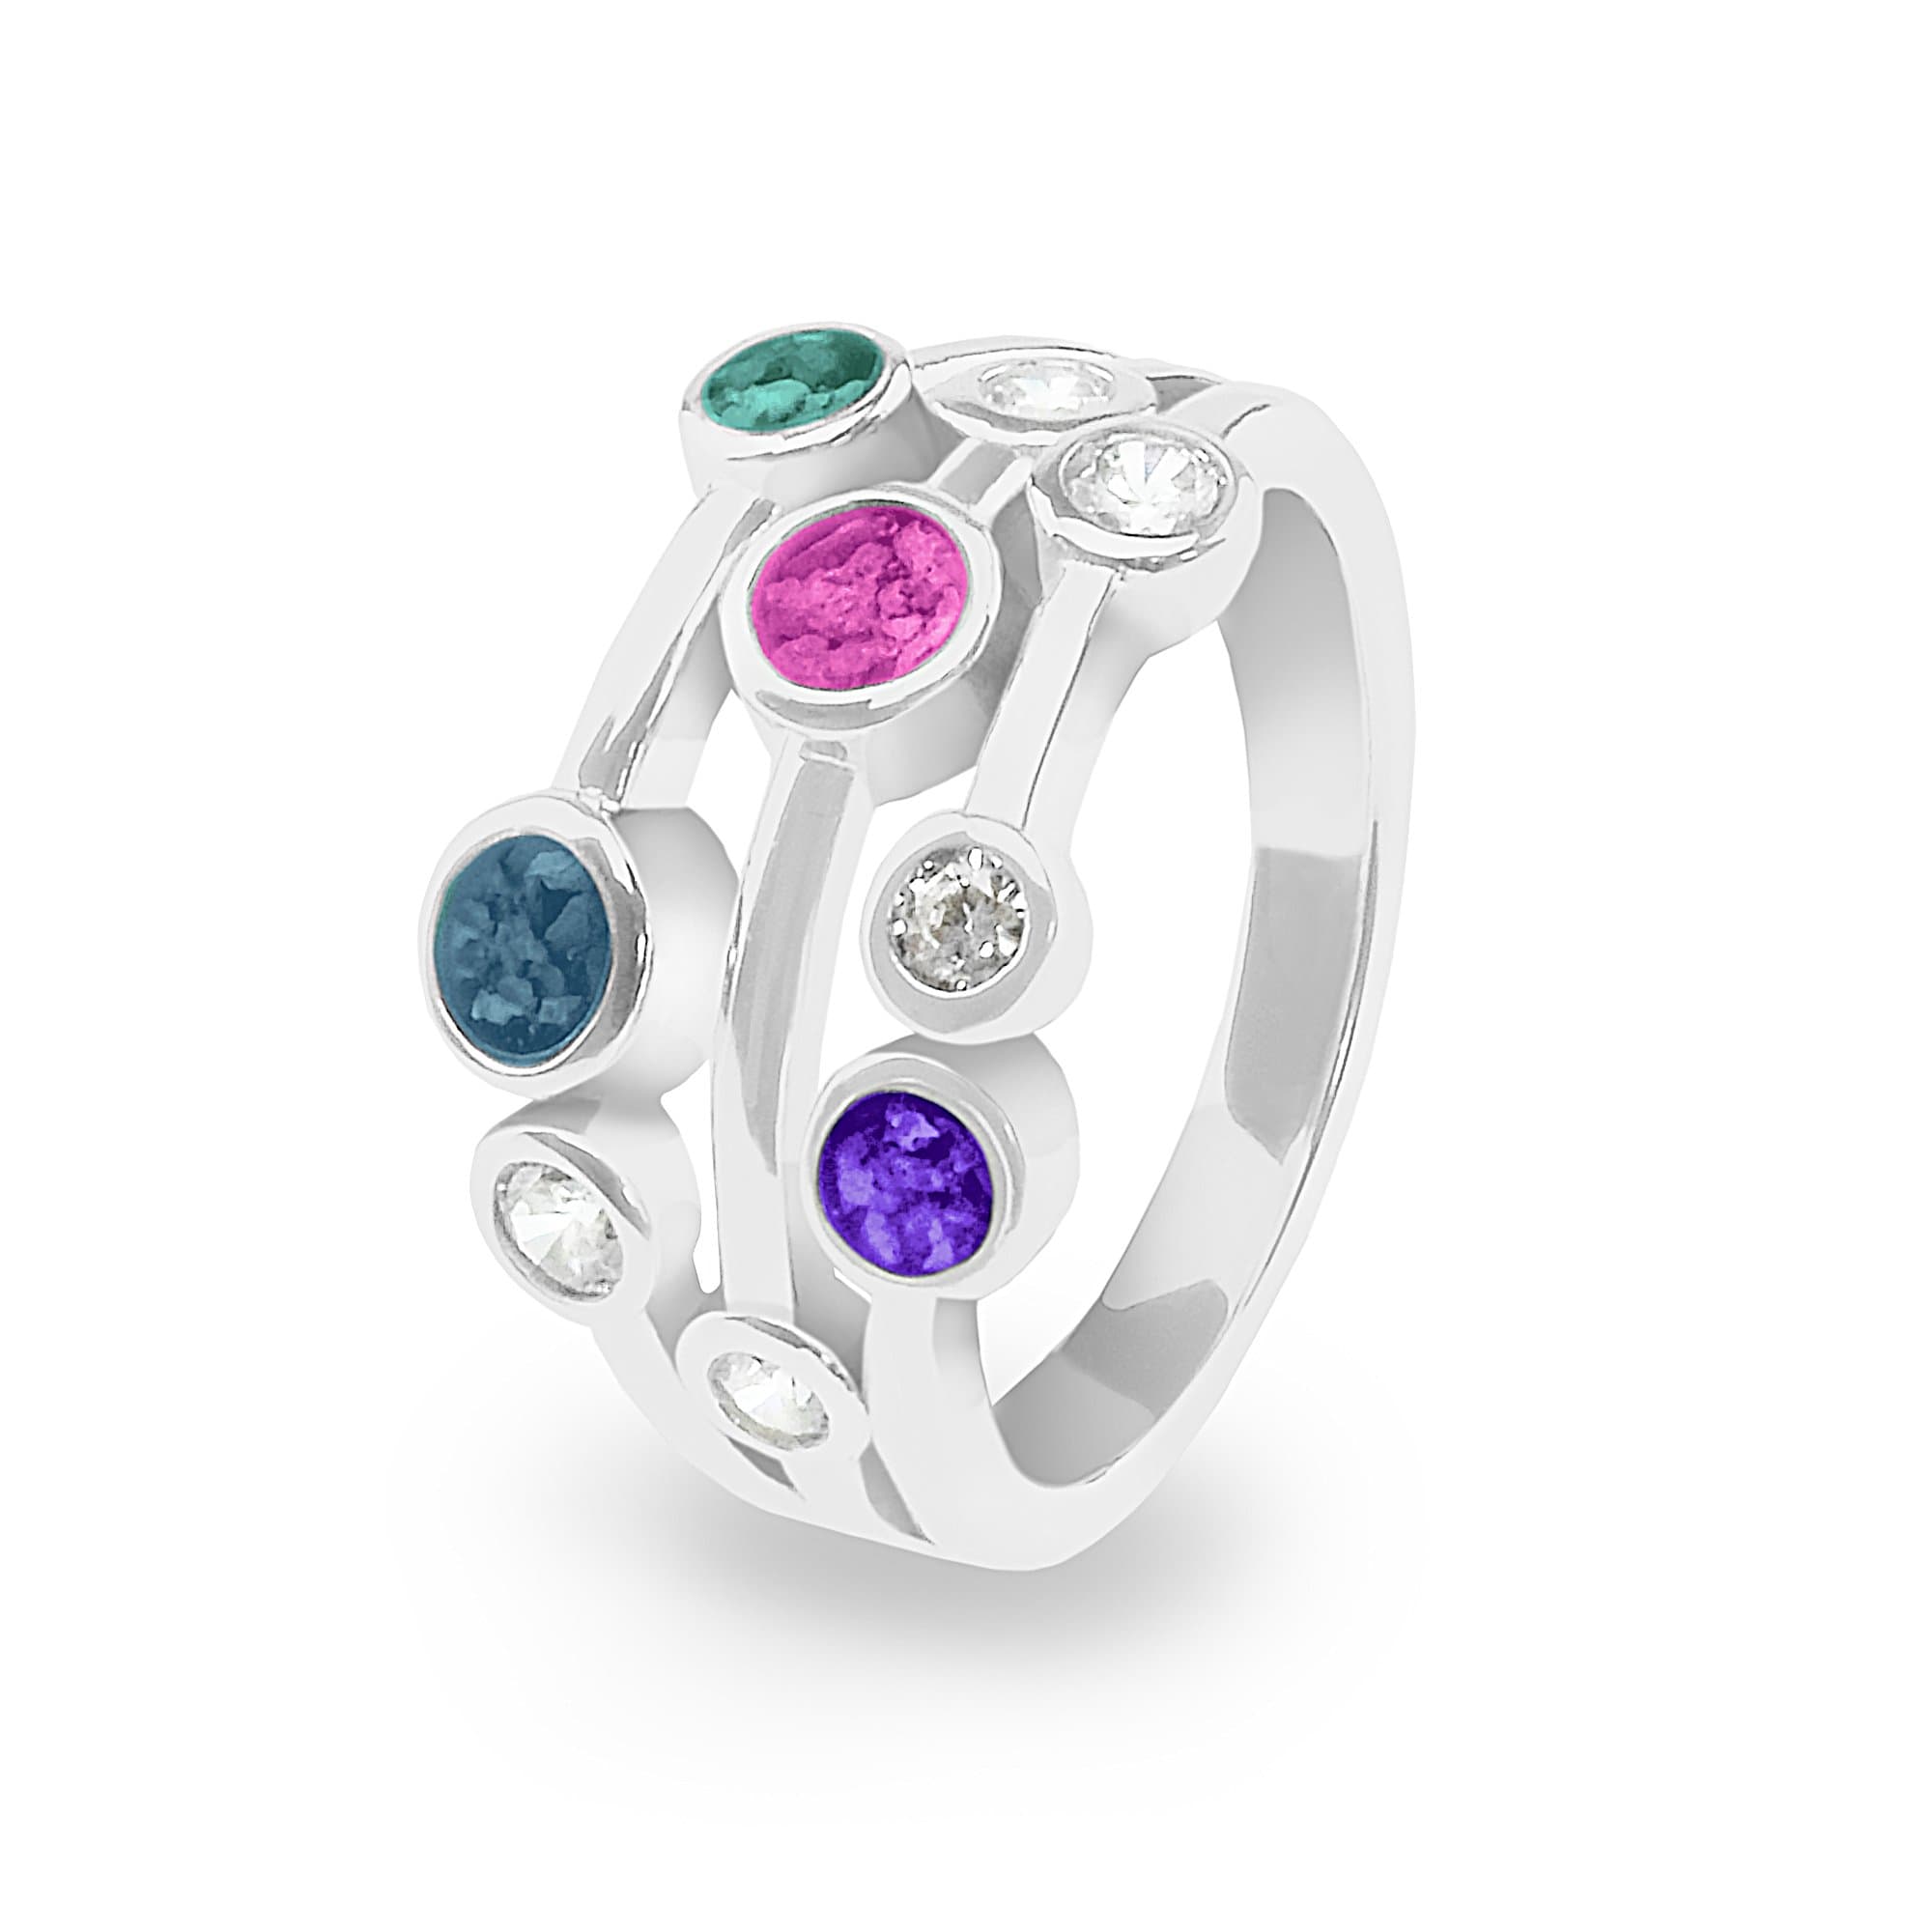 Ladies Droplets Memorial Ashes Ring with Fine Crystals